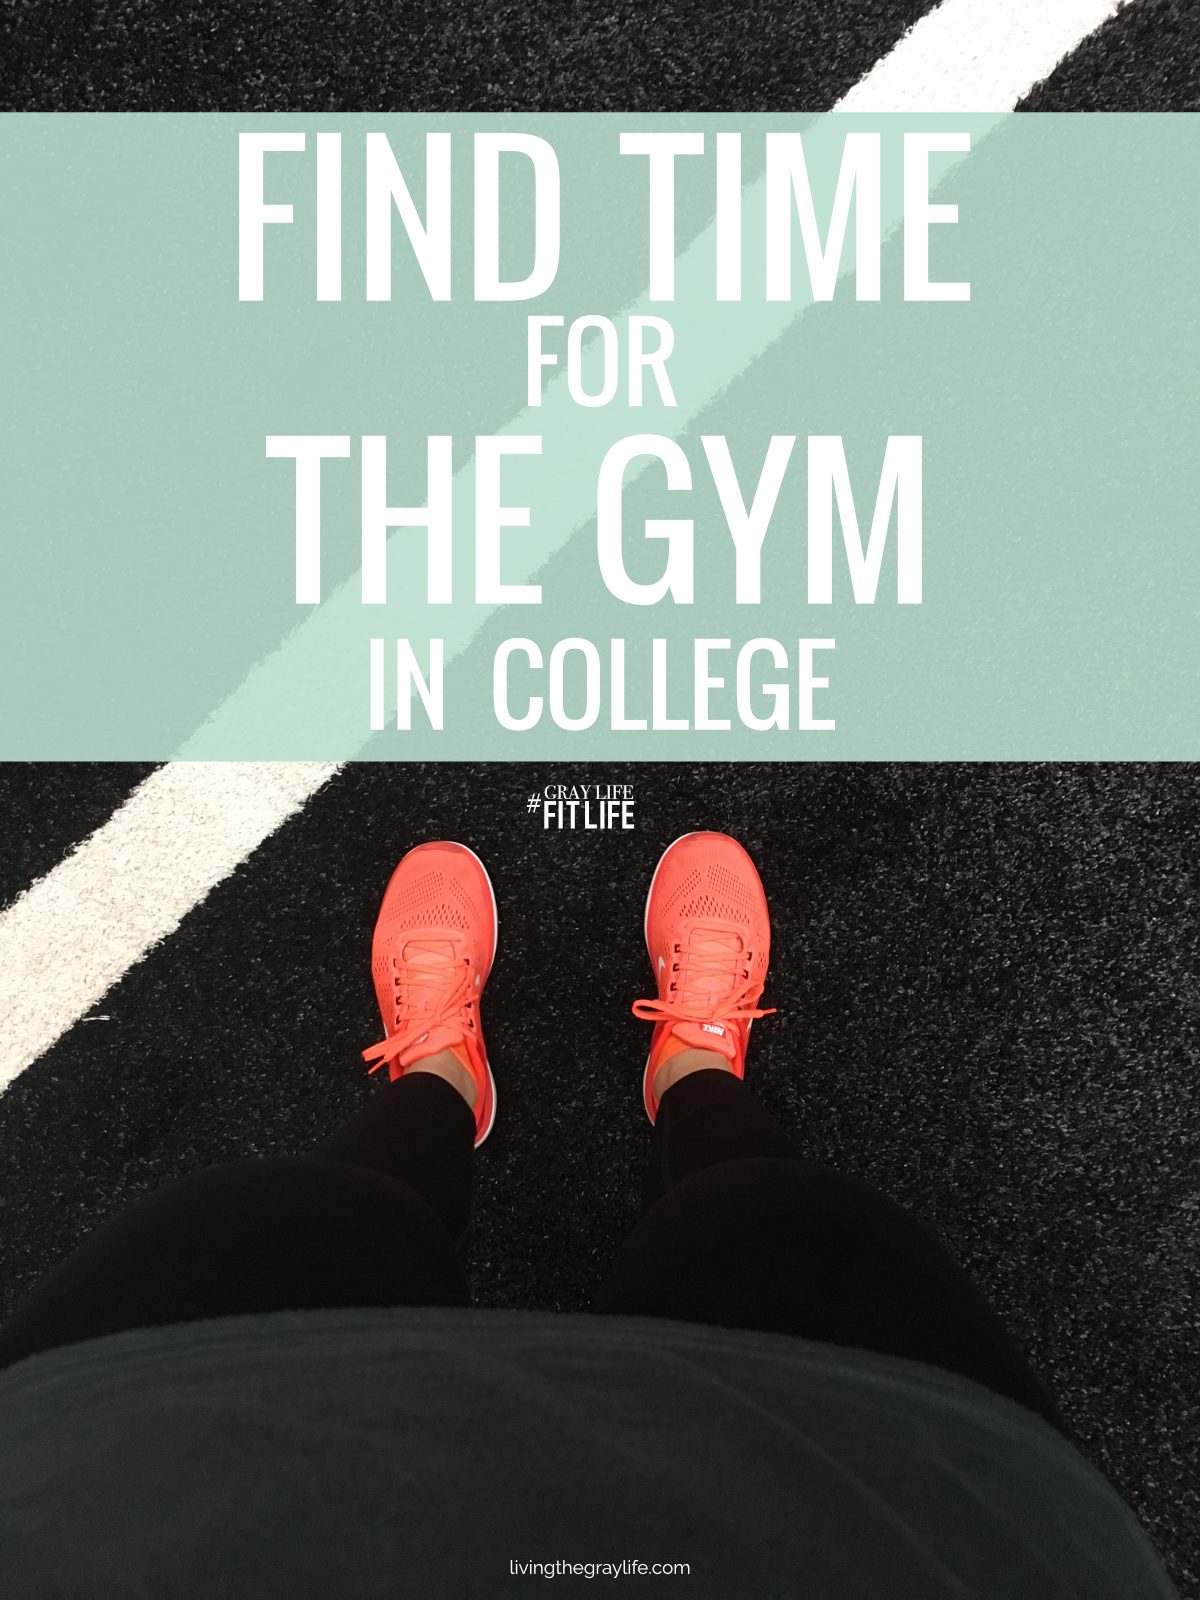 How to Find Time for the Gym in College